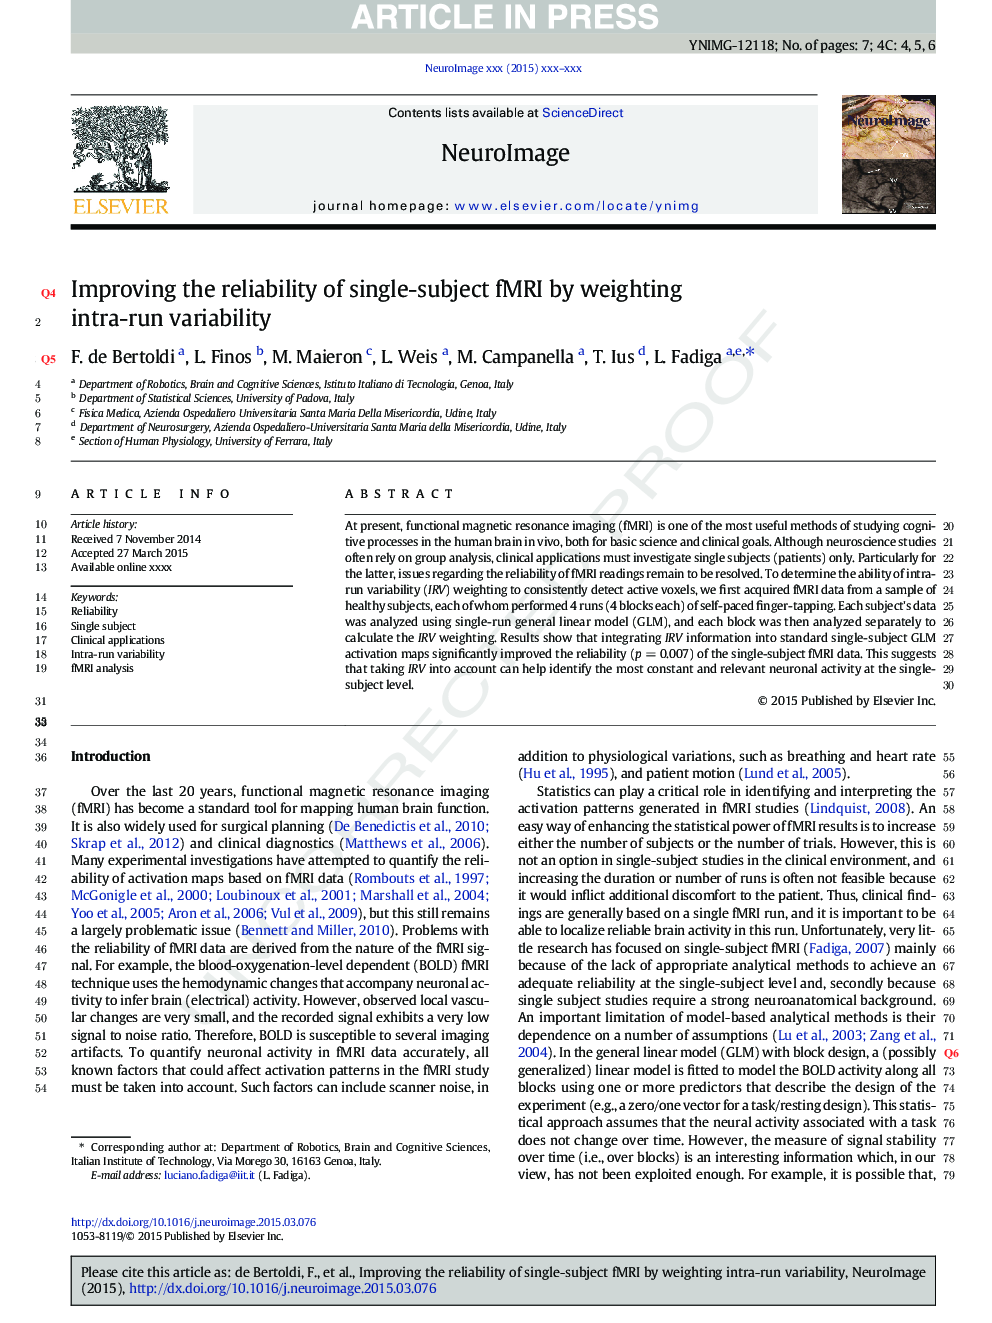 Improving the reliability of single-subject fMRI by weighting intra-run variability